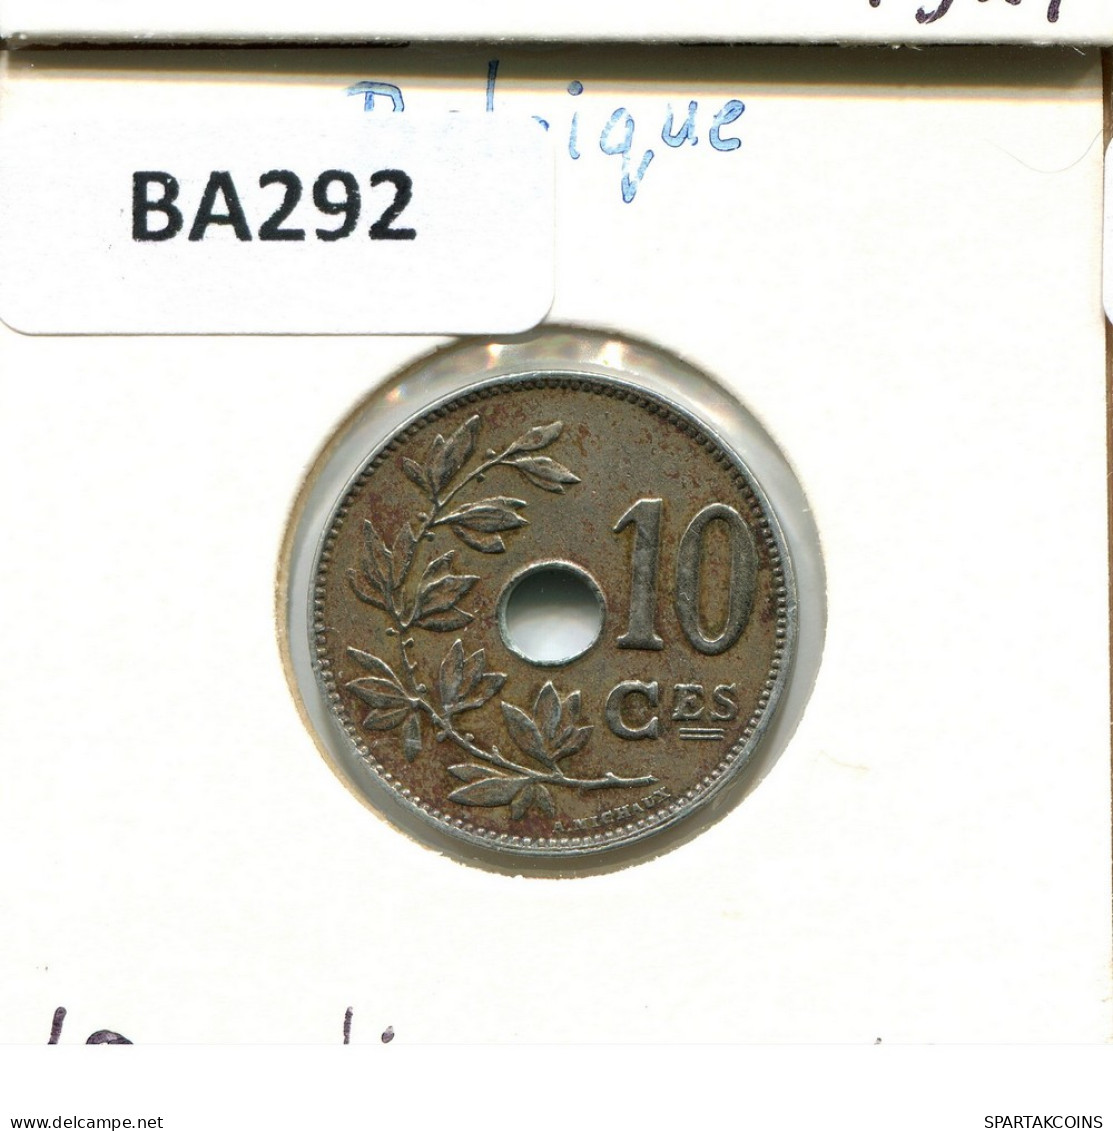 10 CENTIMES 1927 FRENCH Text BELGIUM Coin #BA292.U - 10 Cents